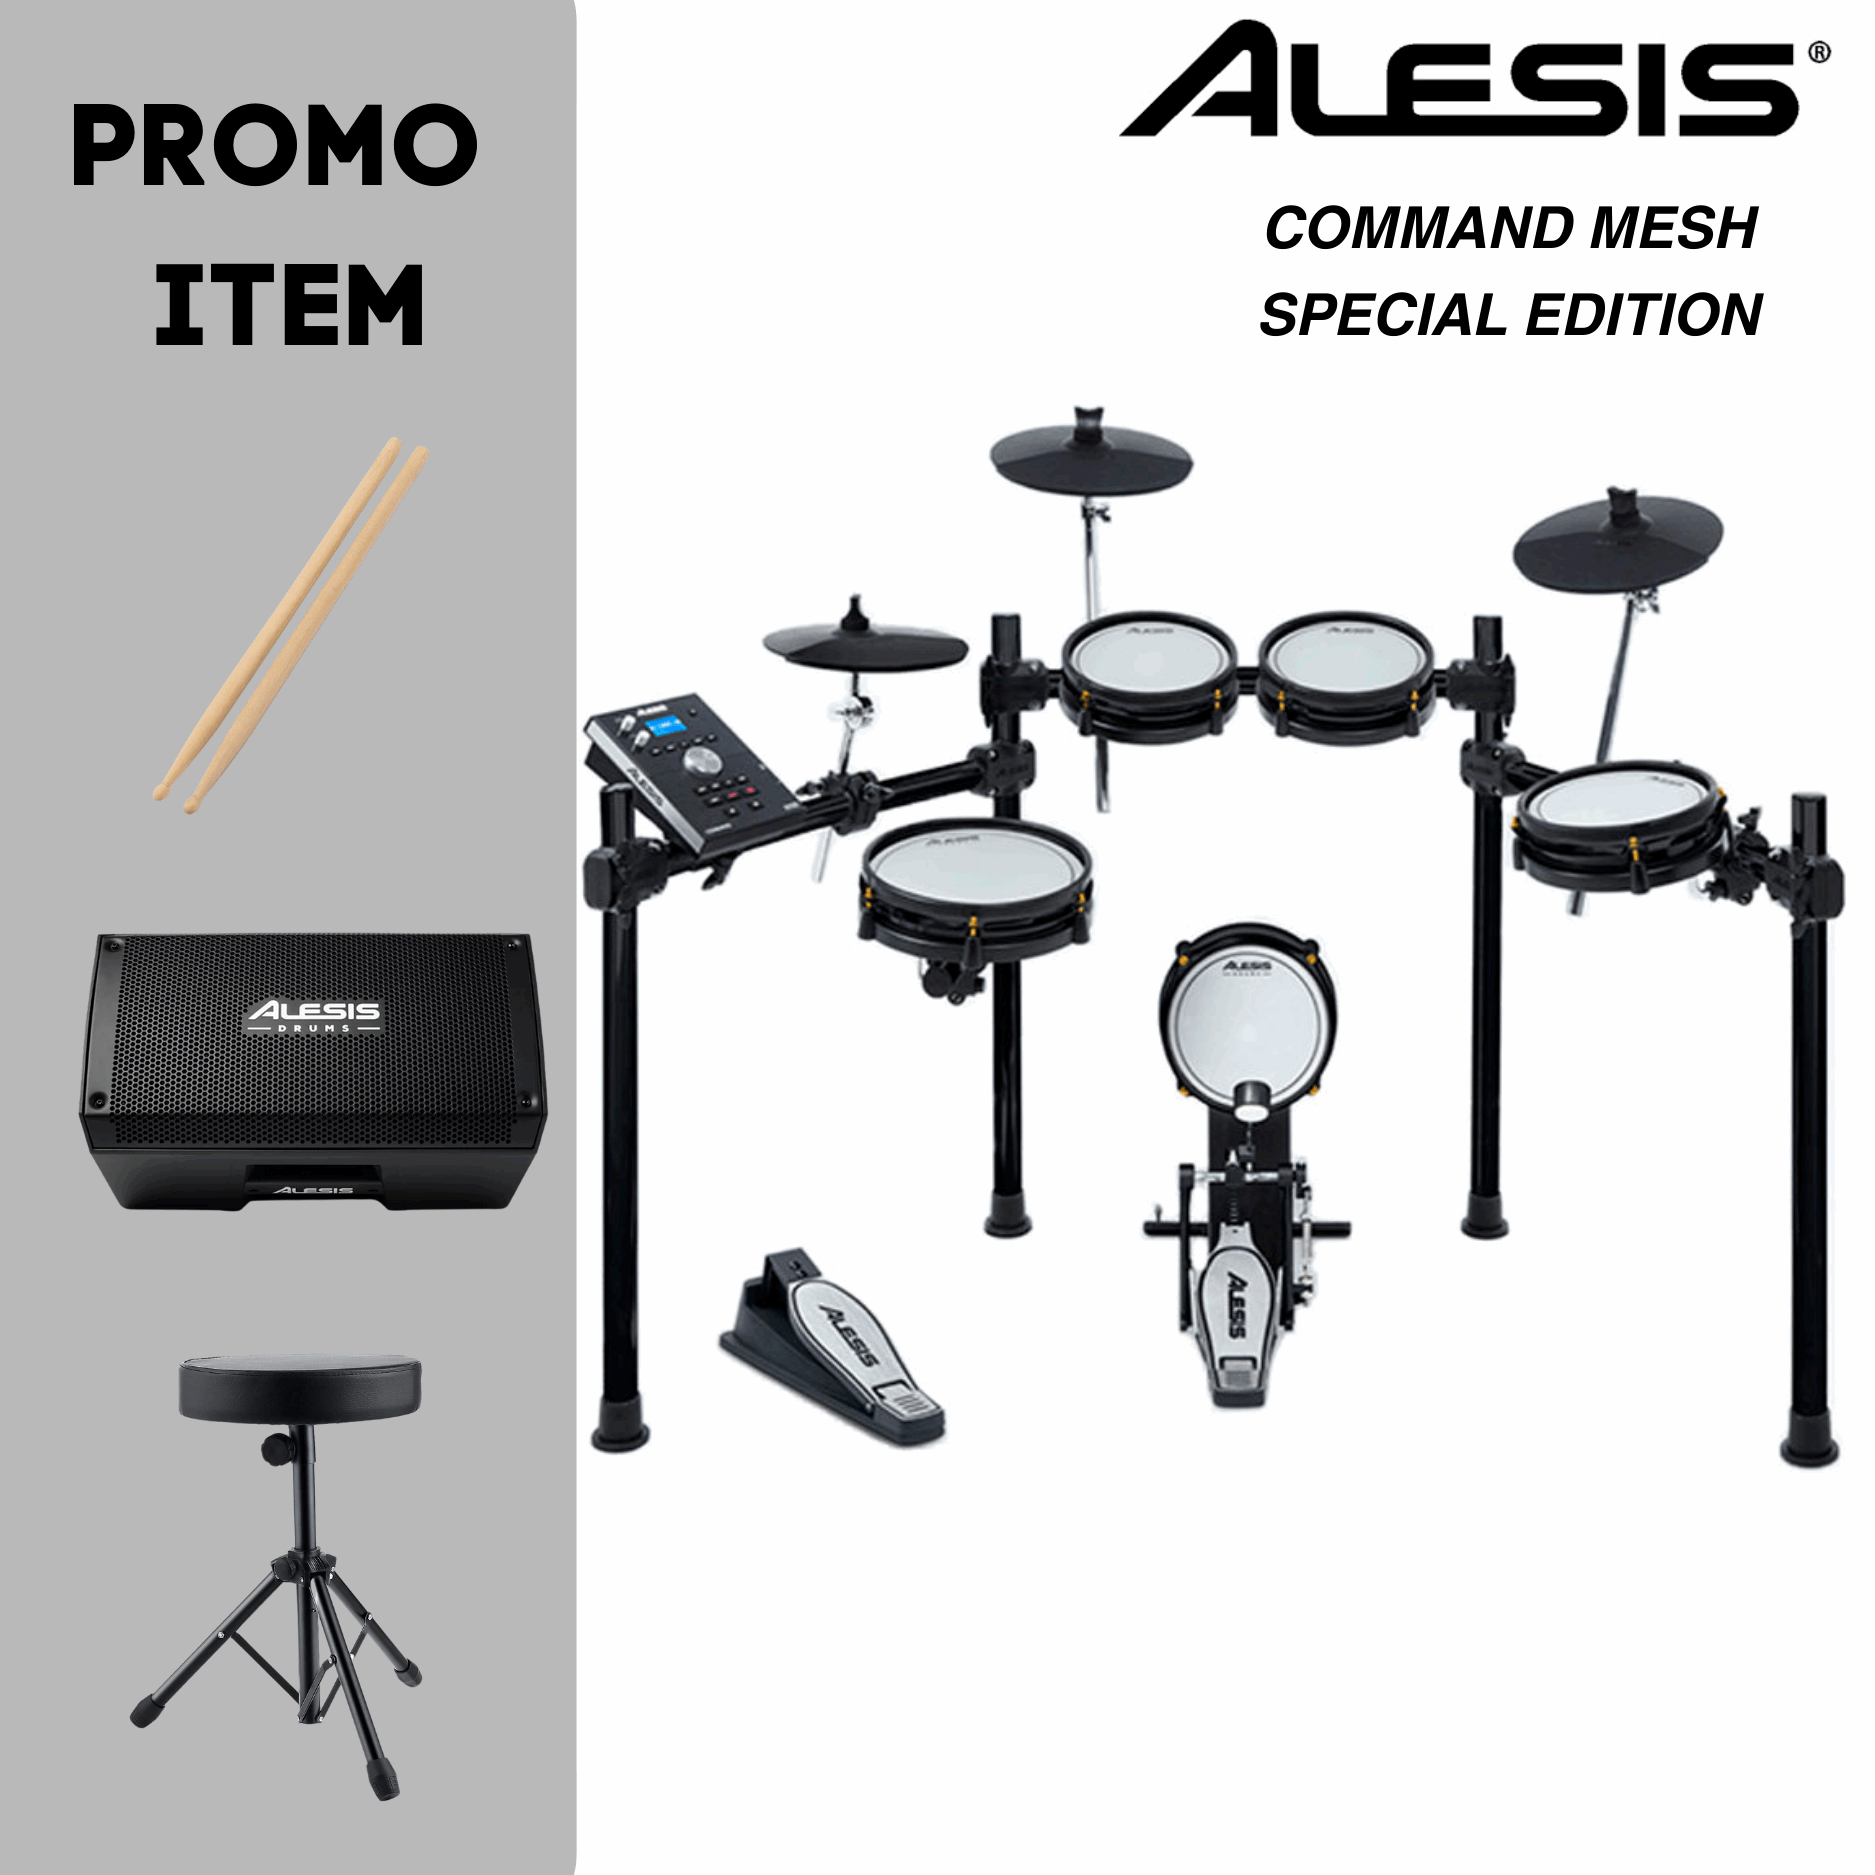 Alesis Command Mesh Special Edition With Promo Item Zoso Music